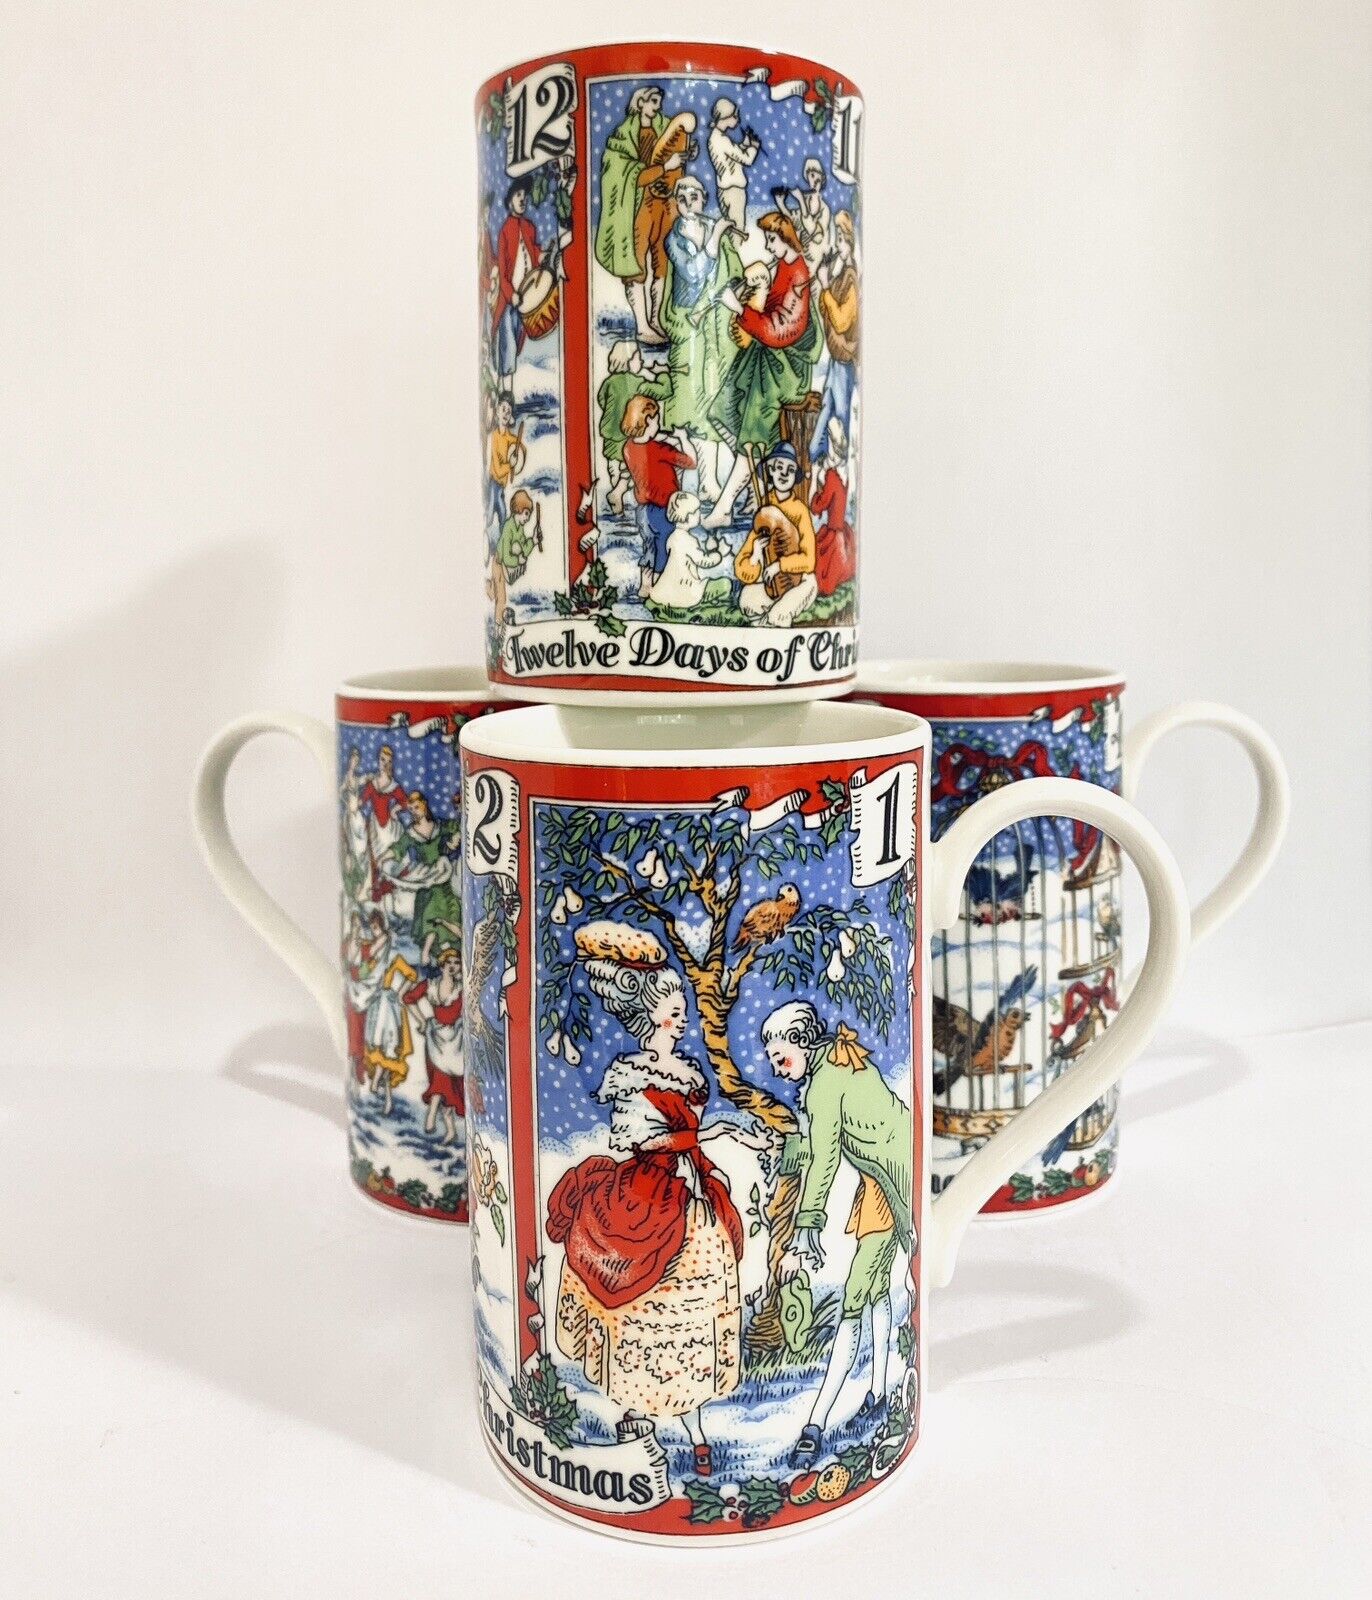 DUNOON 12 Days Of Christmas Mugs (Set Of 4) 1st Day Through 12th Day - Scotland